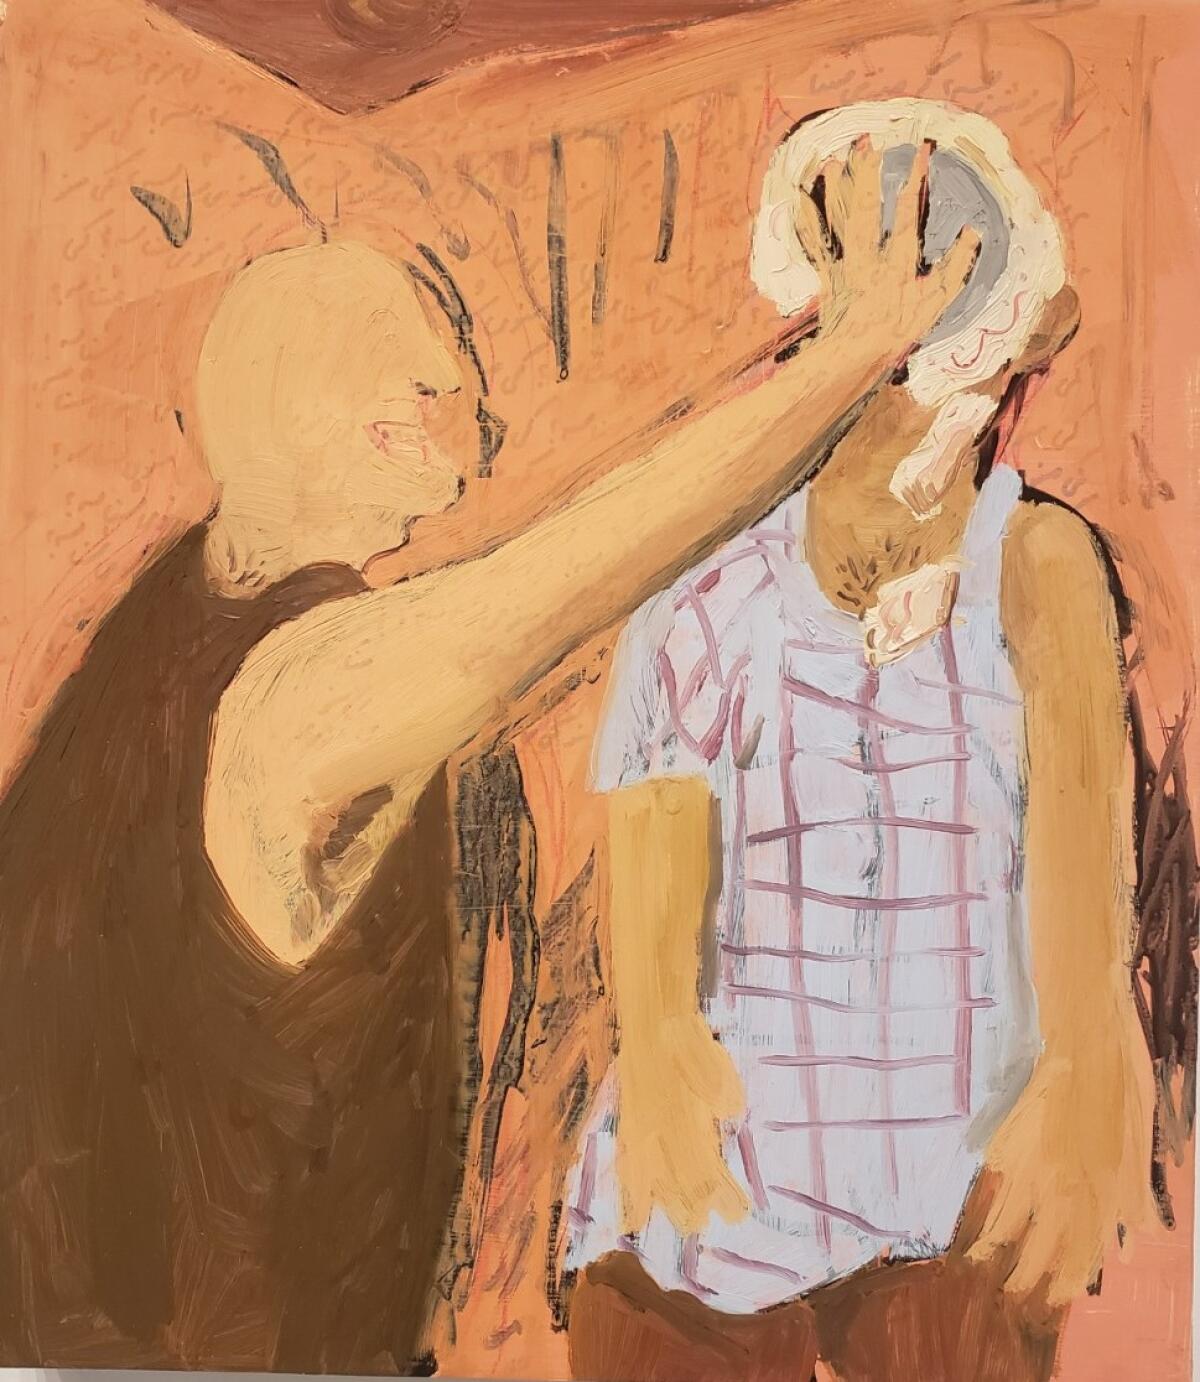 A painting of a man smushing a cake in another man's face.